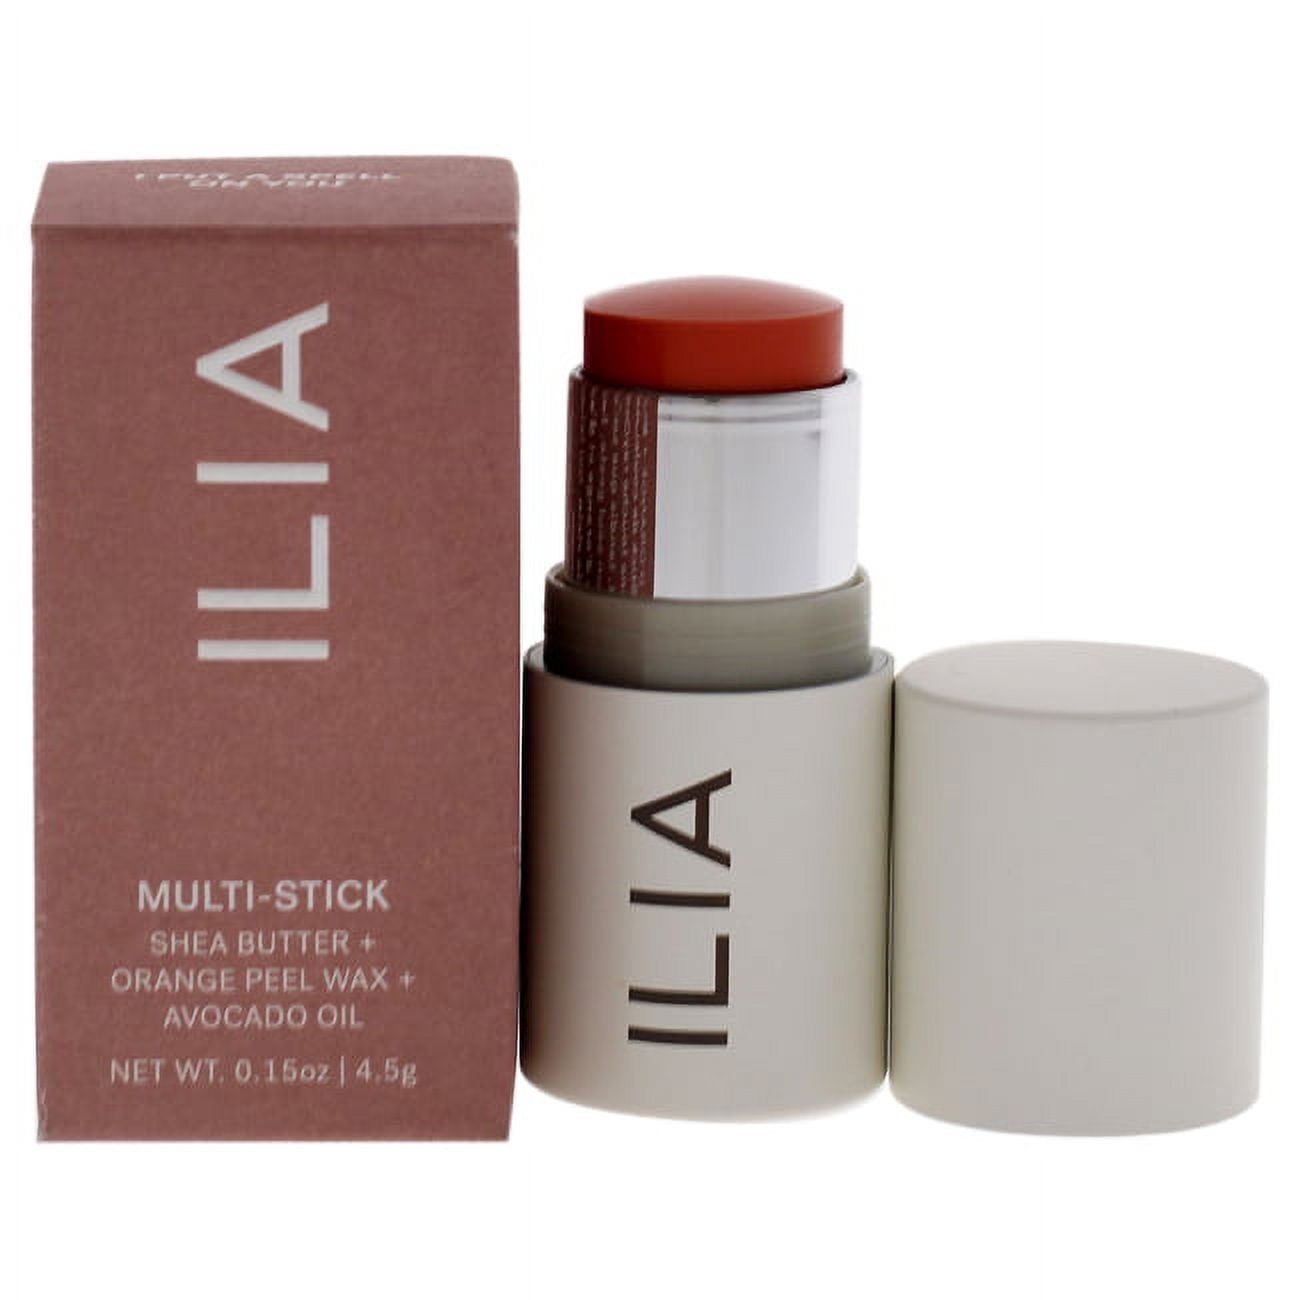 Multi-Stick - I Put A Spell On You by ILIA Beauty for Women - 0.15 oz